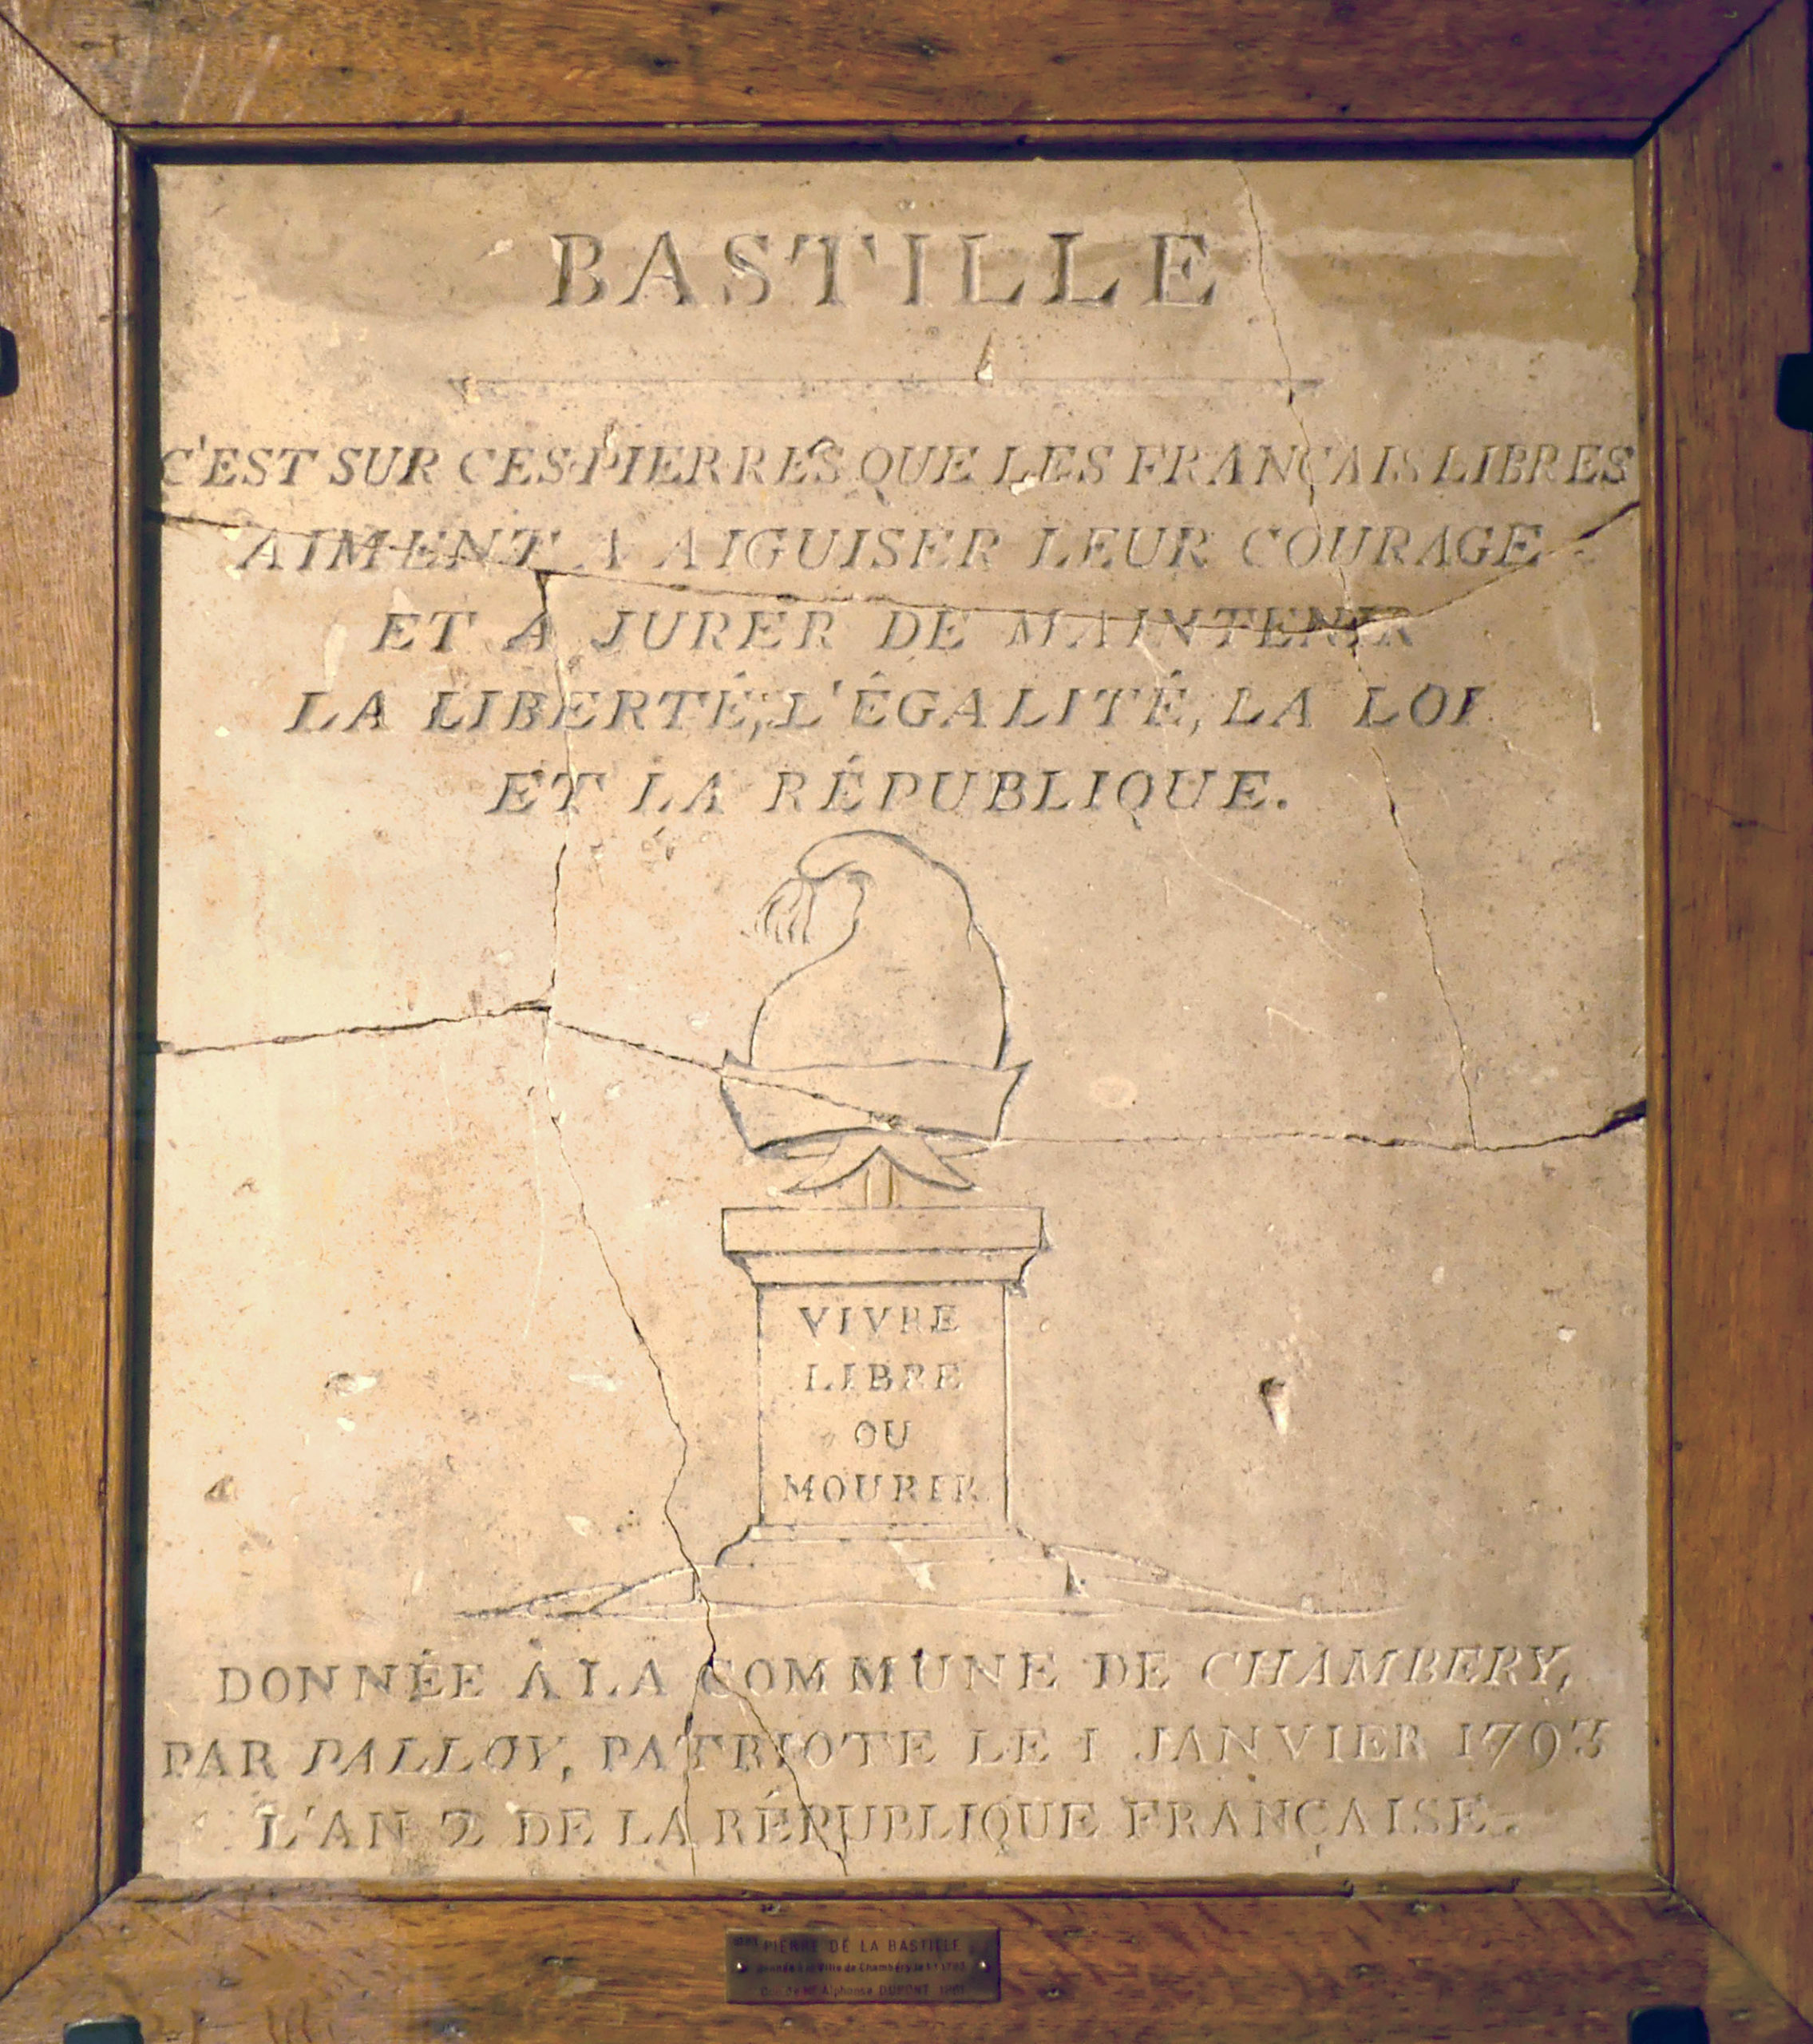 Bastille Stone in Chambéry - Musée Savoisien (Public Domain from Wikimedia Commons]